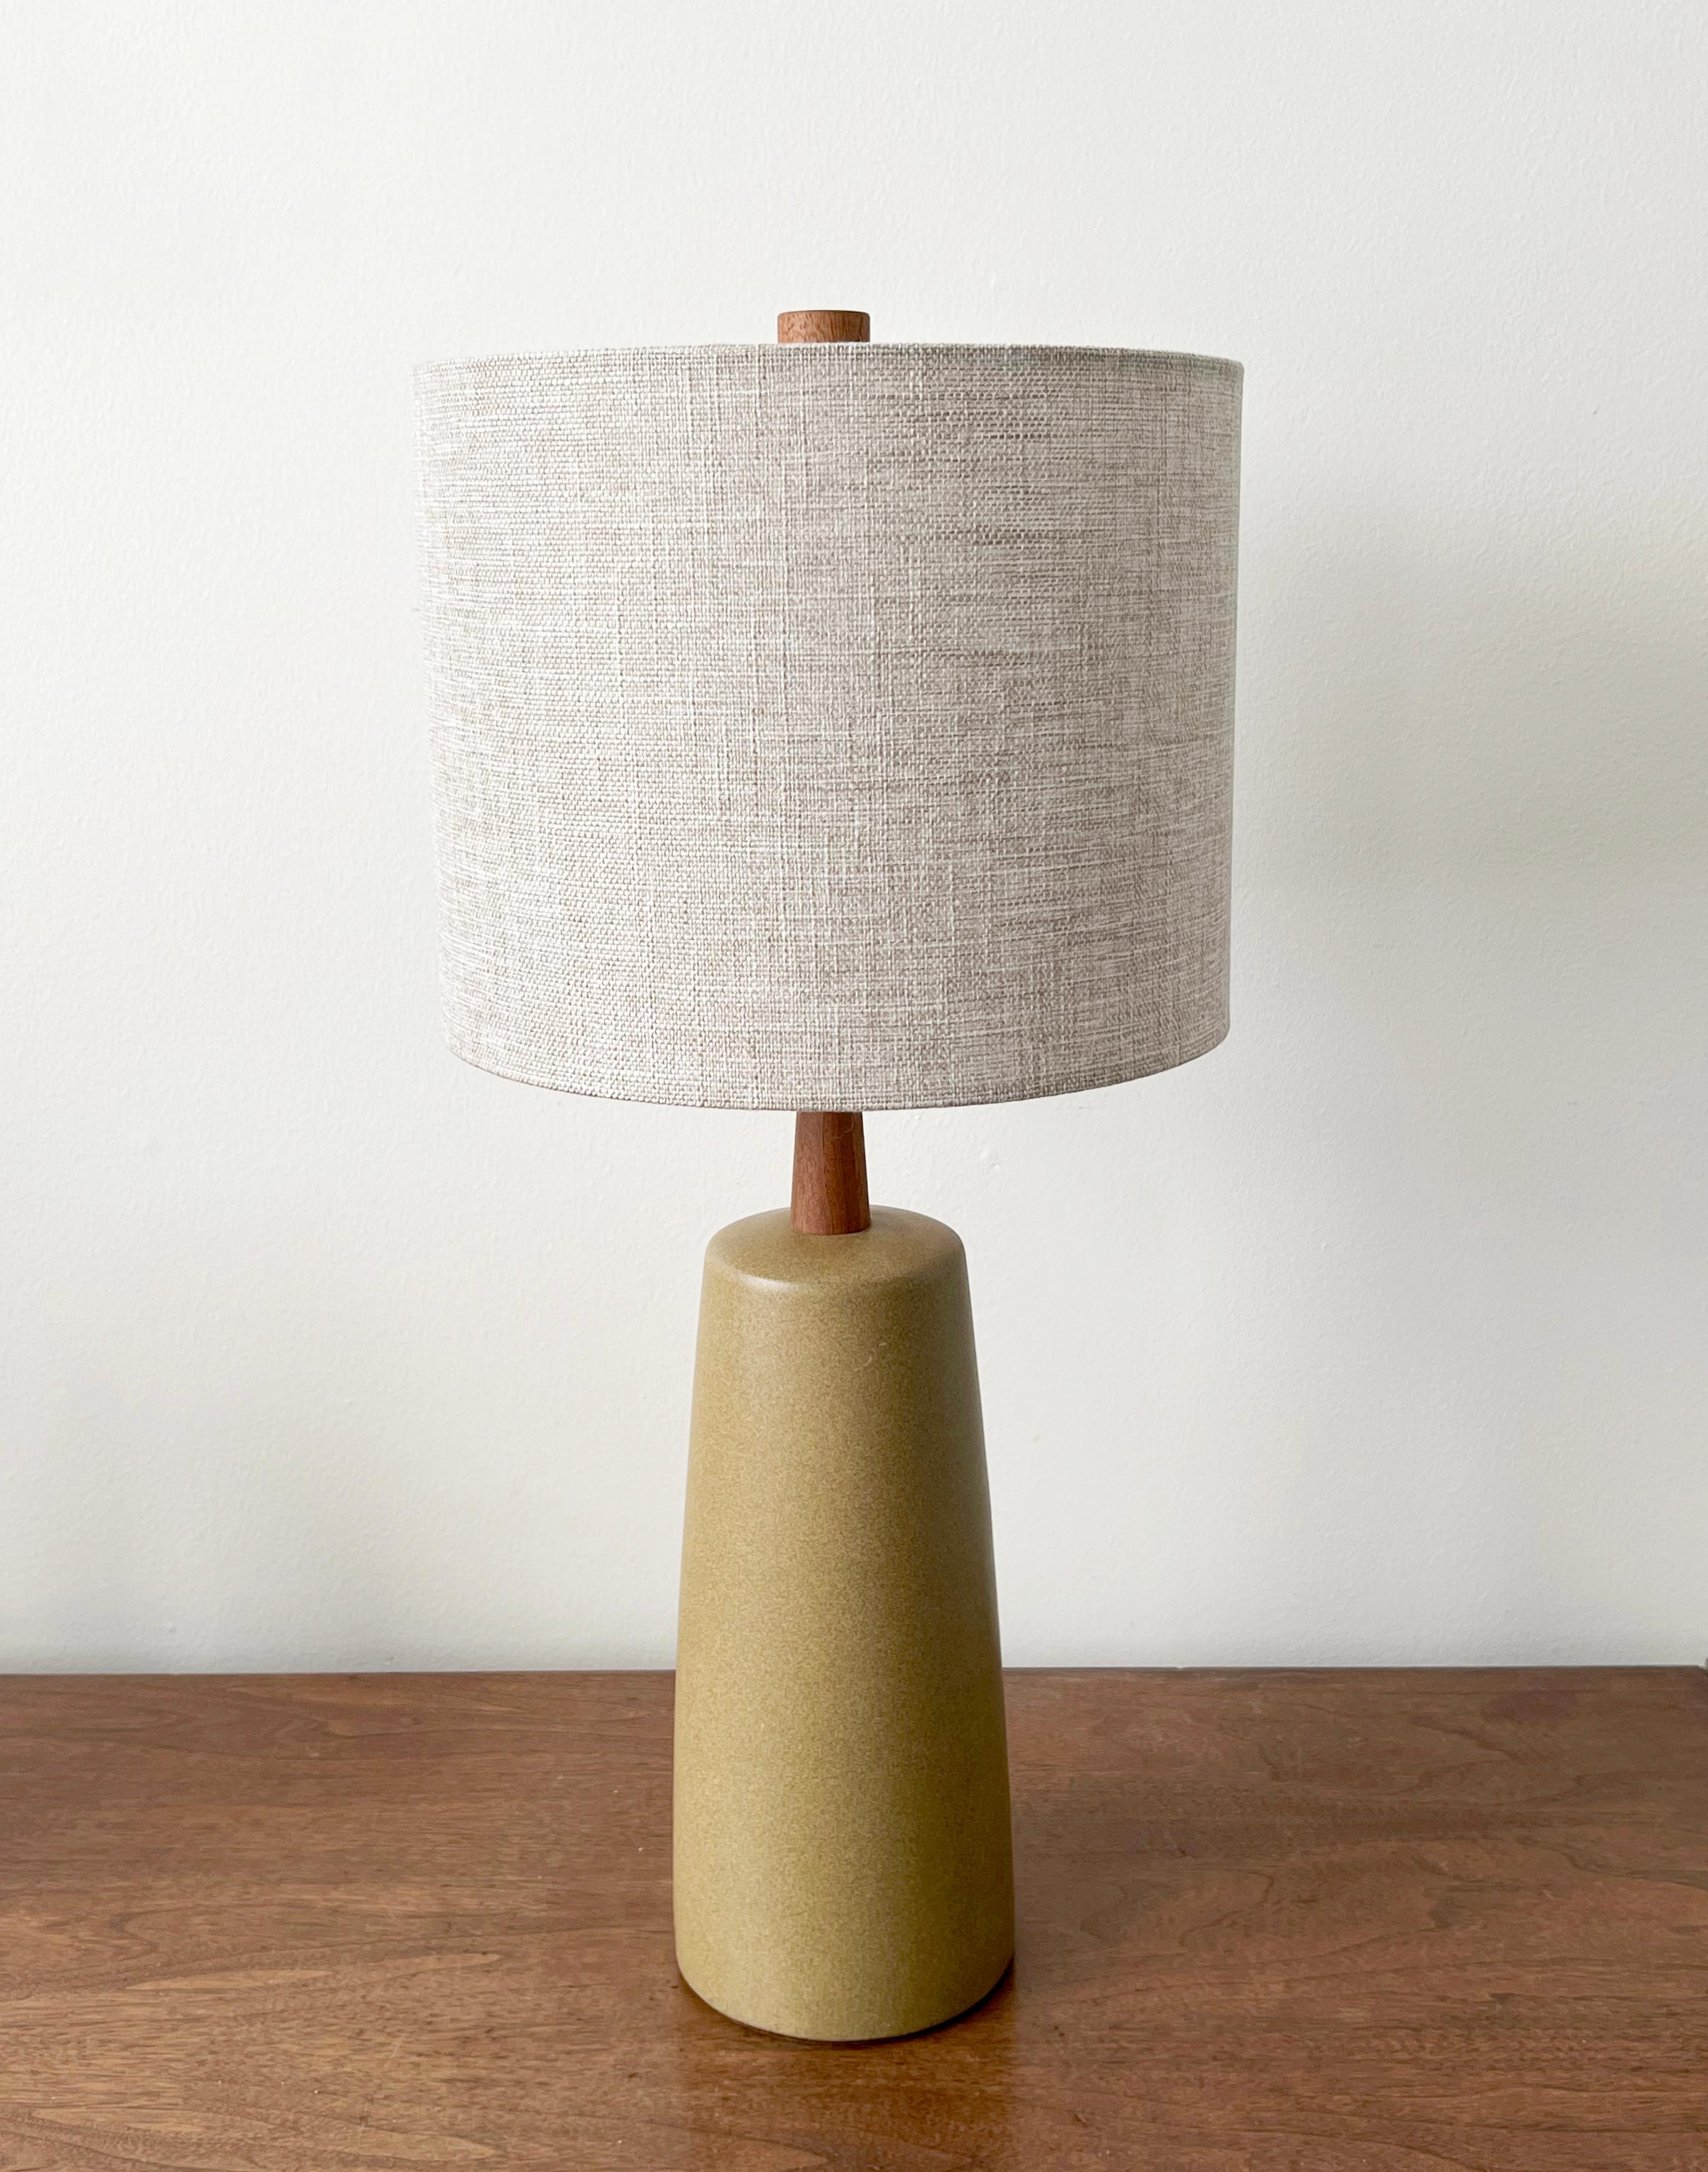 A yellow ochre speckled matte glaze table lamp designed by husband and wife duo Jane & Gordon Martz. Produced by Marshall Studios, Indianapolis.

Sold without lampshade. Dimensions in listing exclude shade.
 